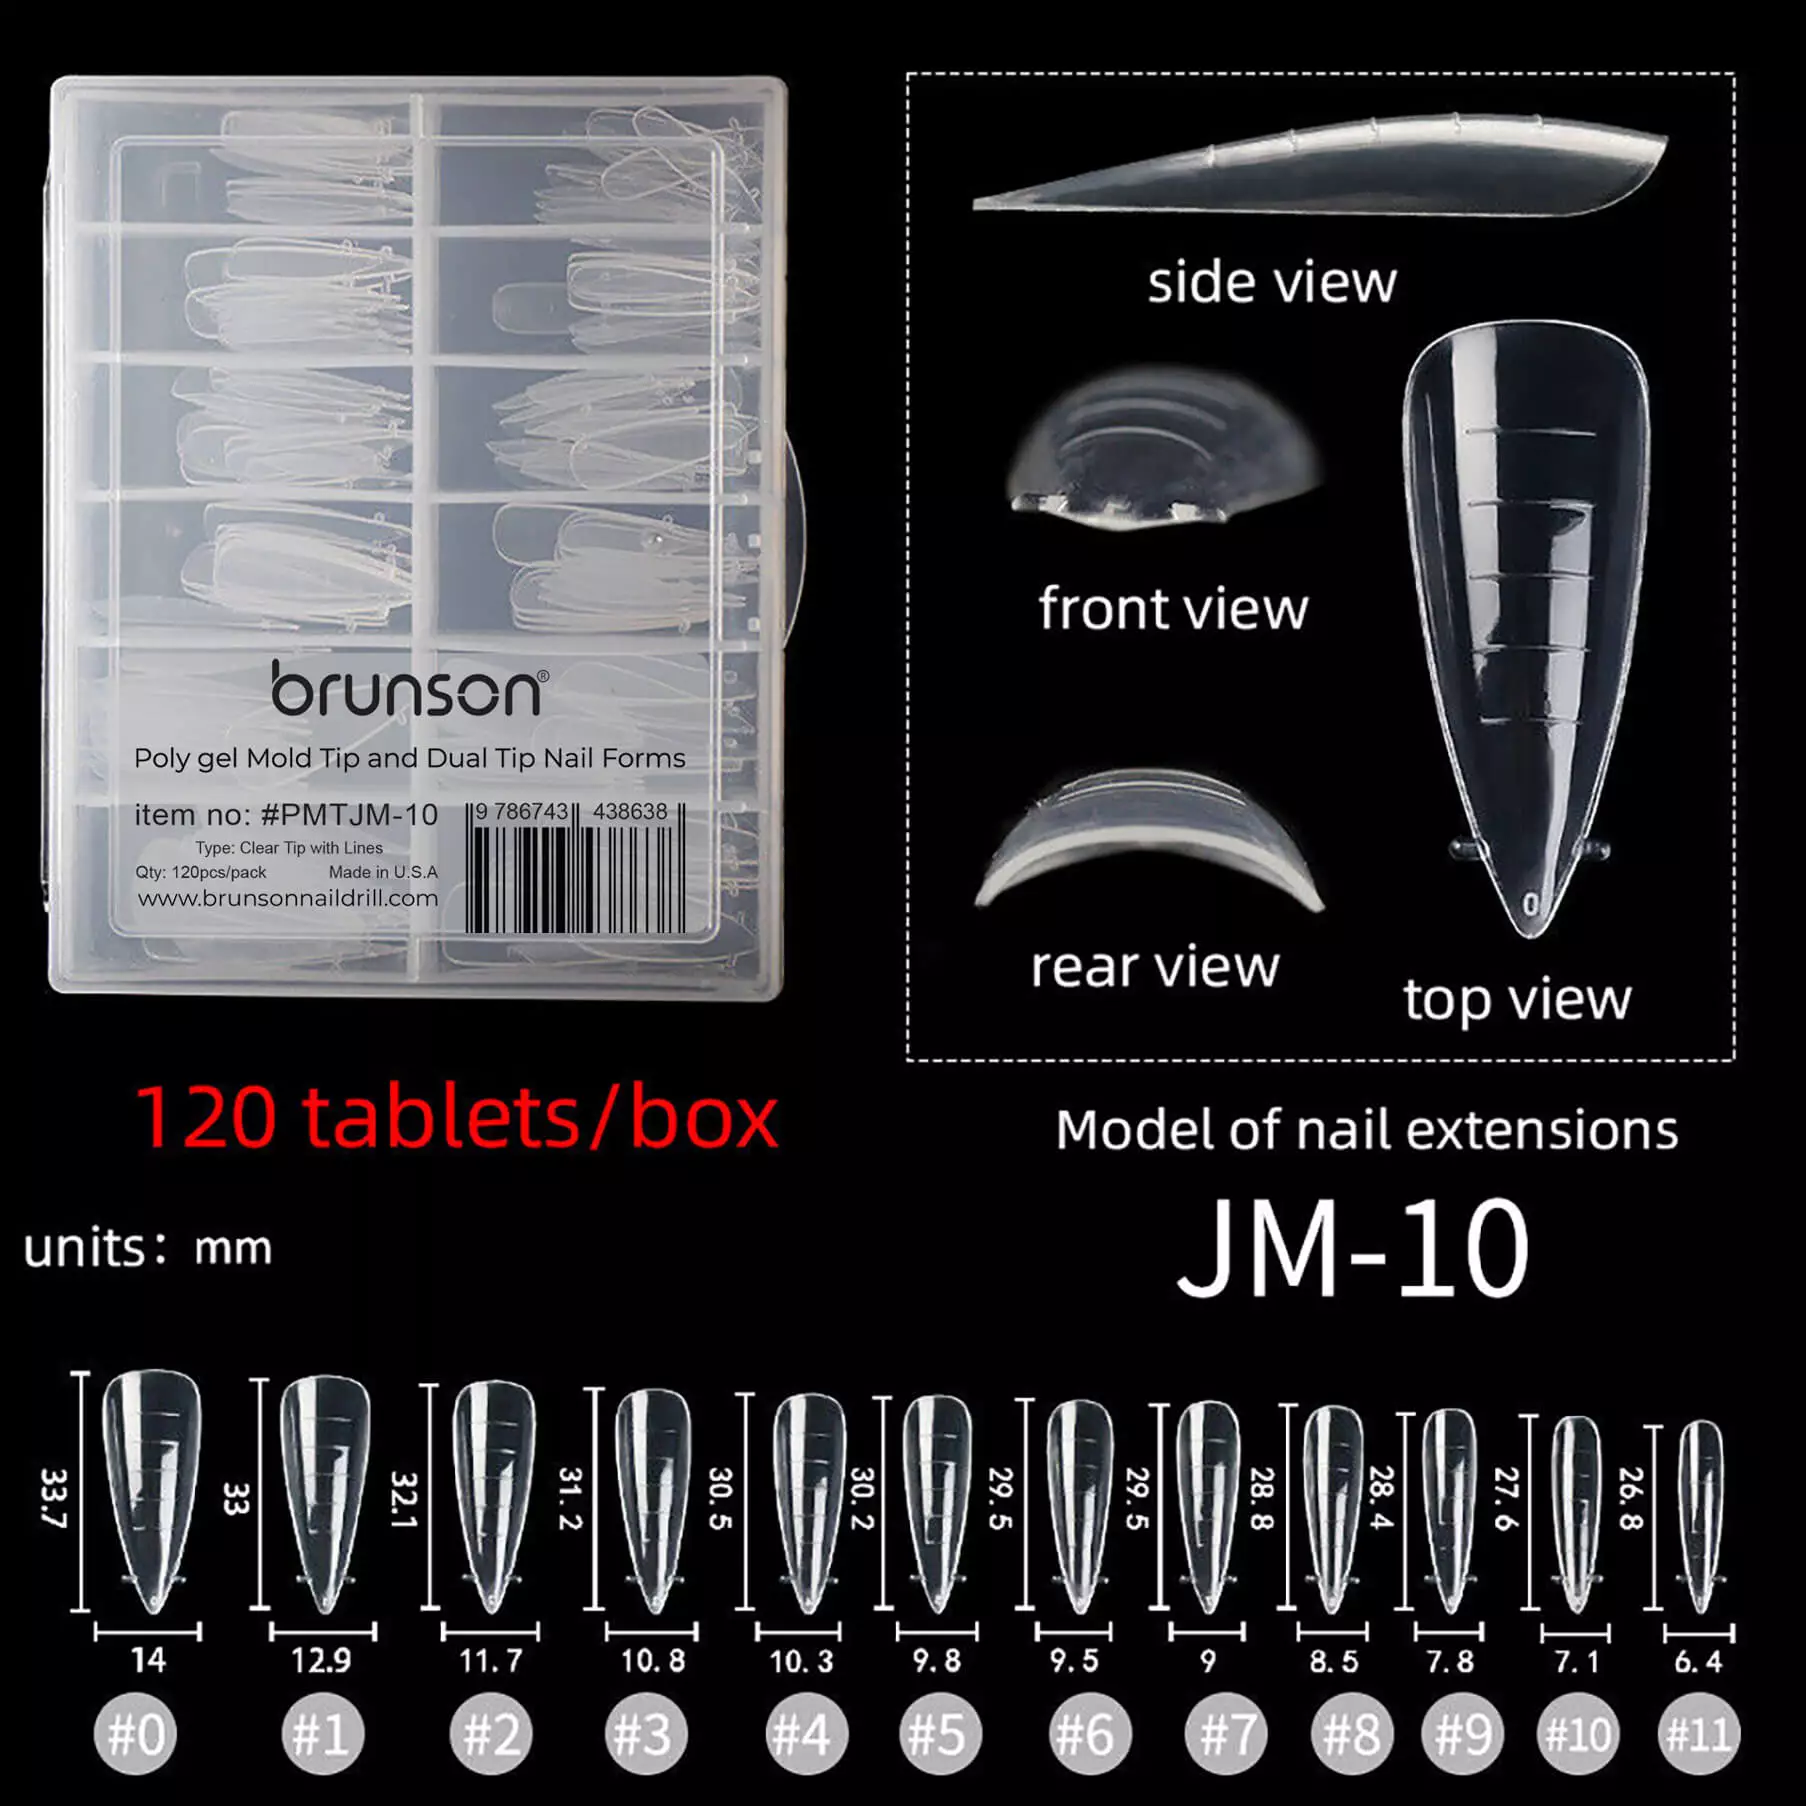 Poly-Gel-Mold-Tip-and-Dual-Tip-Nail-Forms-PMTJM-10-Brunson-2